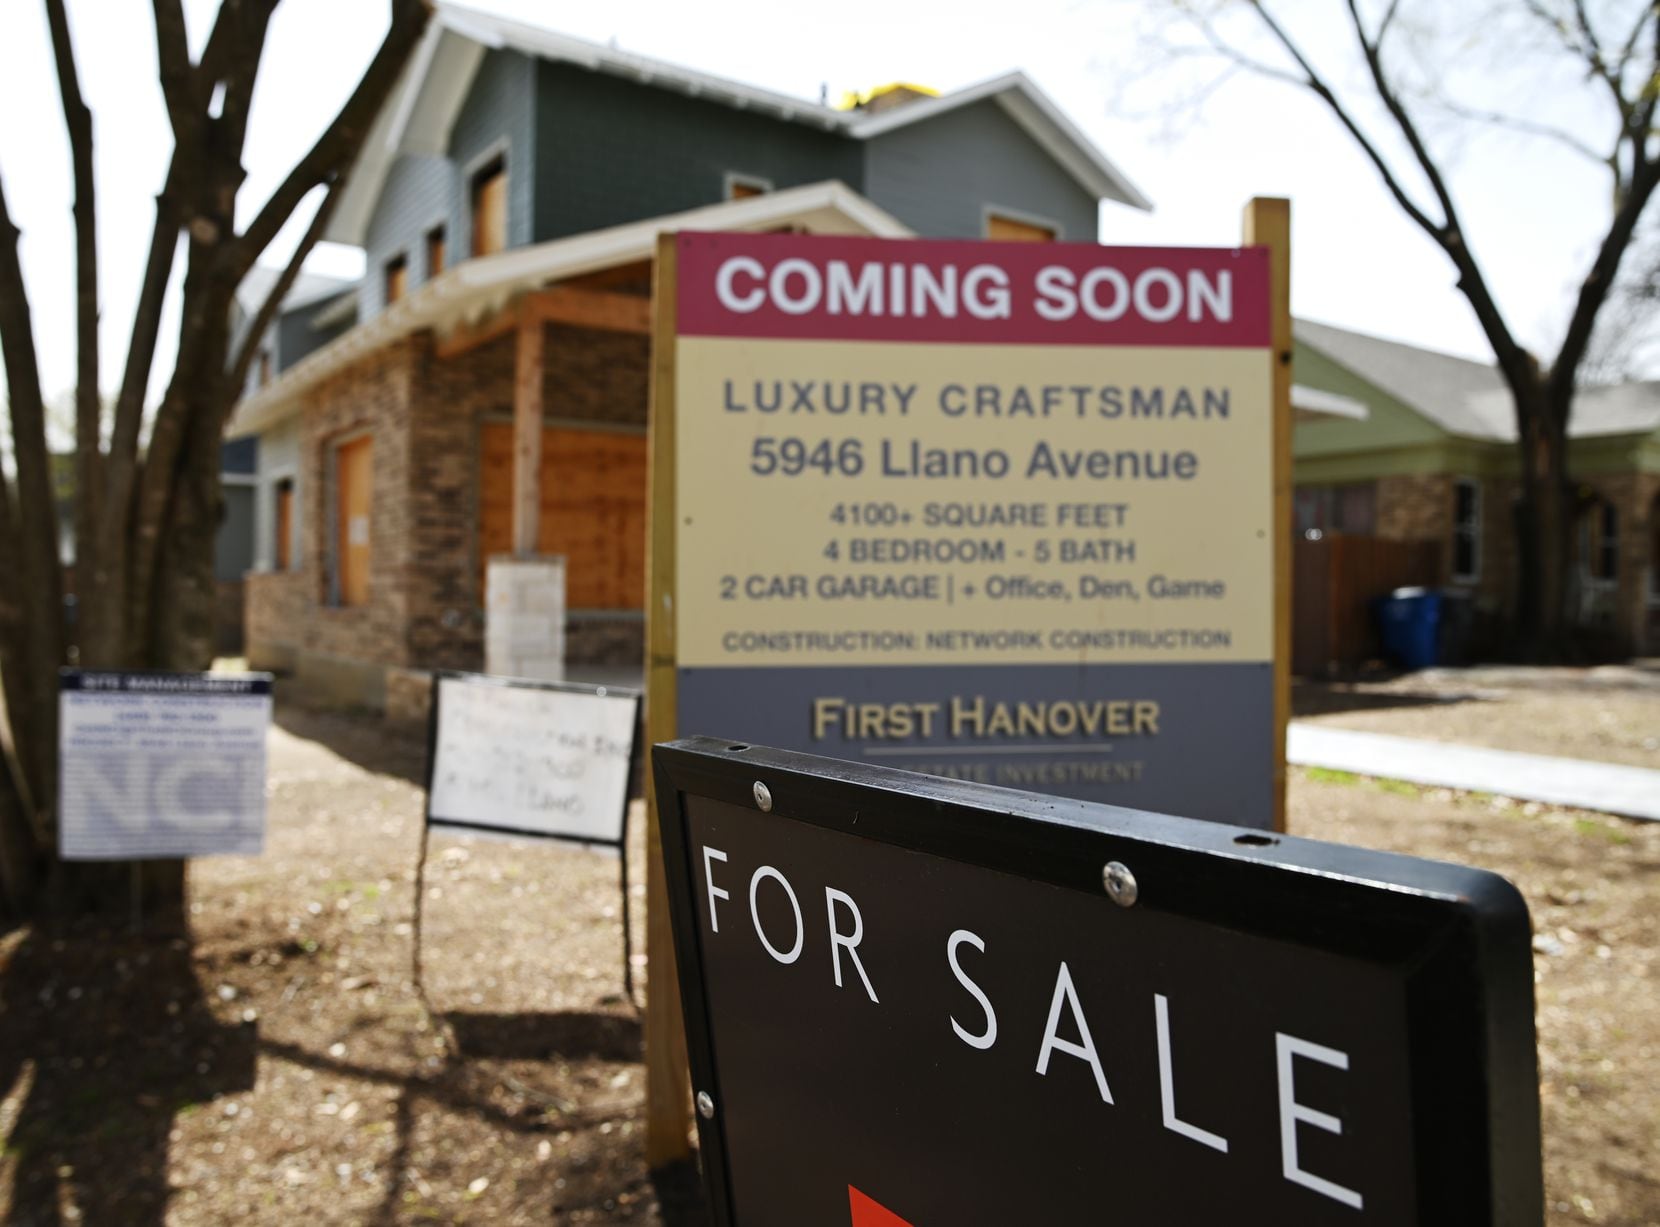 A for sale sign is shown at the construction site of a home on Llano Avenue in Dallas on March 17.